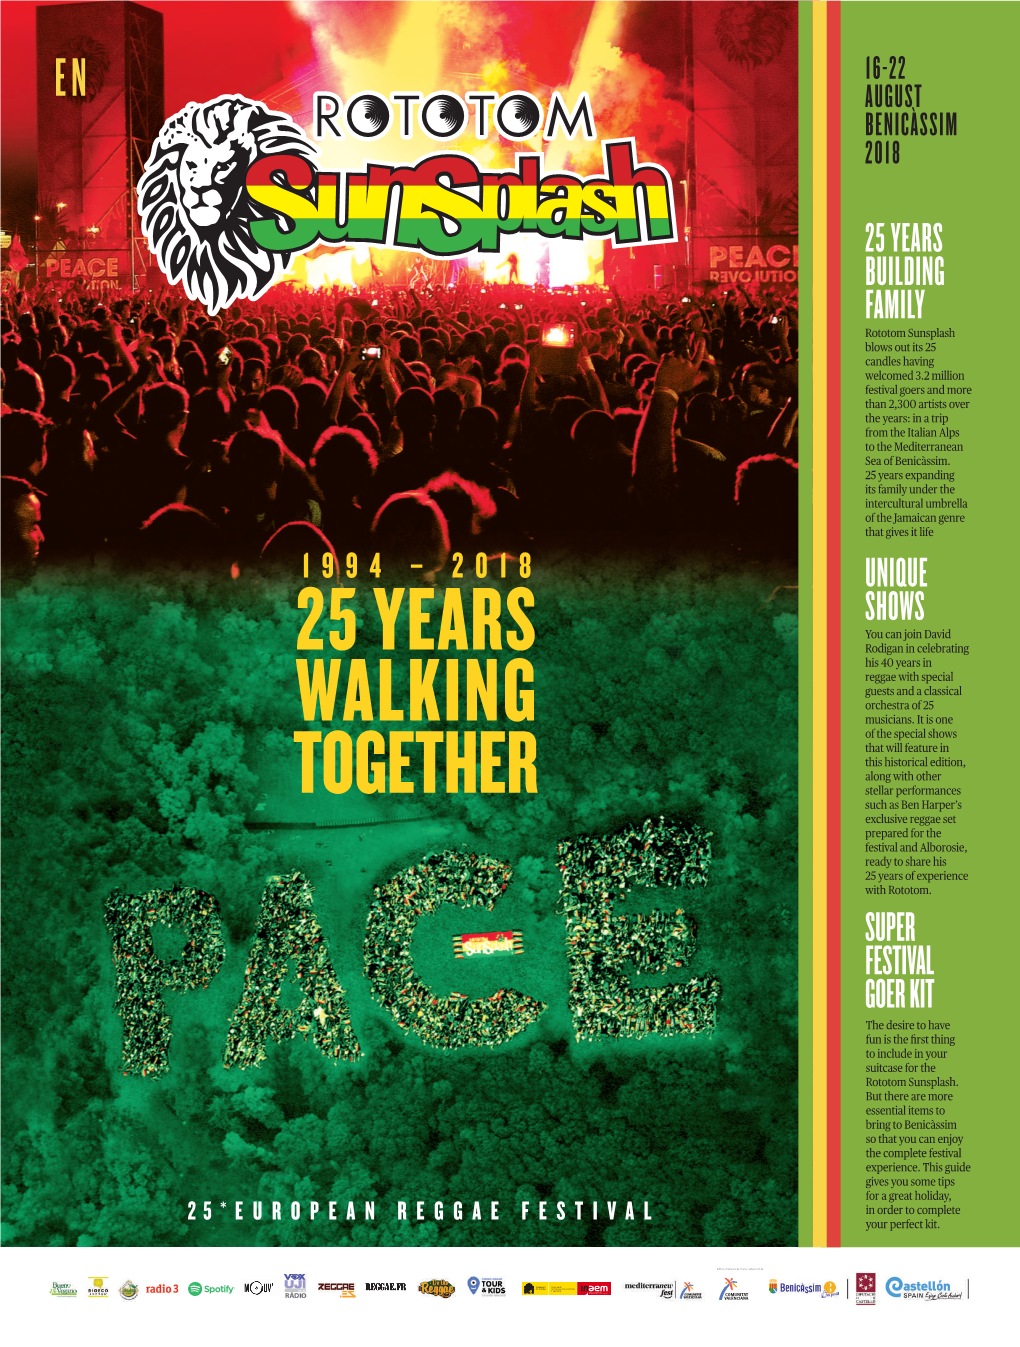 Rototom Sunsplash 2018 Merchandise, Reaffirms Its a Glass of 35 Cl Or a Litre for Transport and Bicycles Eco and Social Commitments